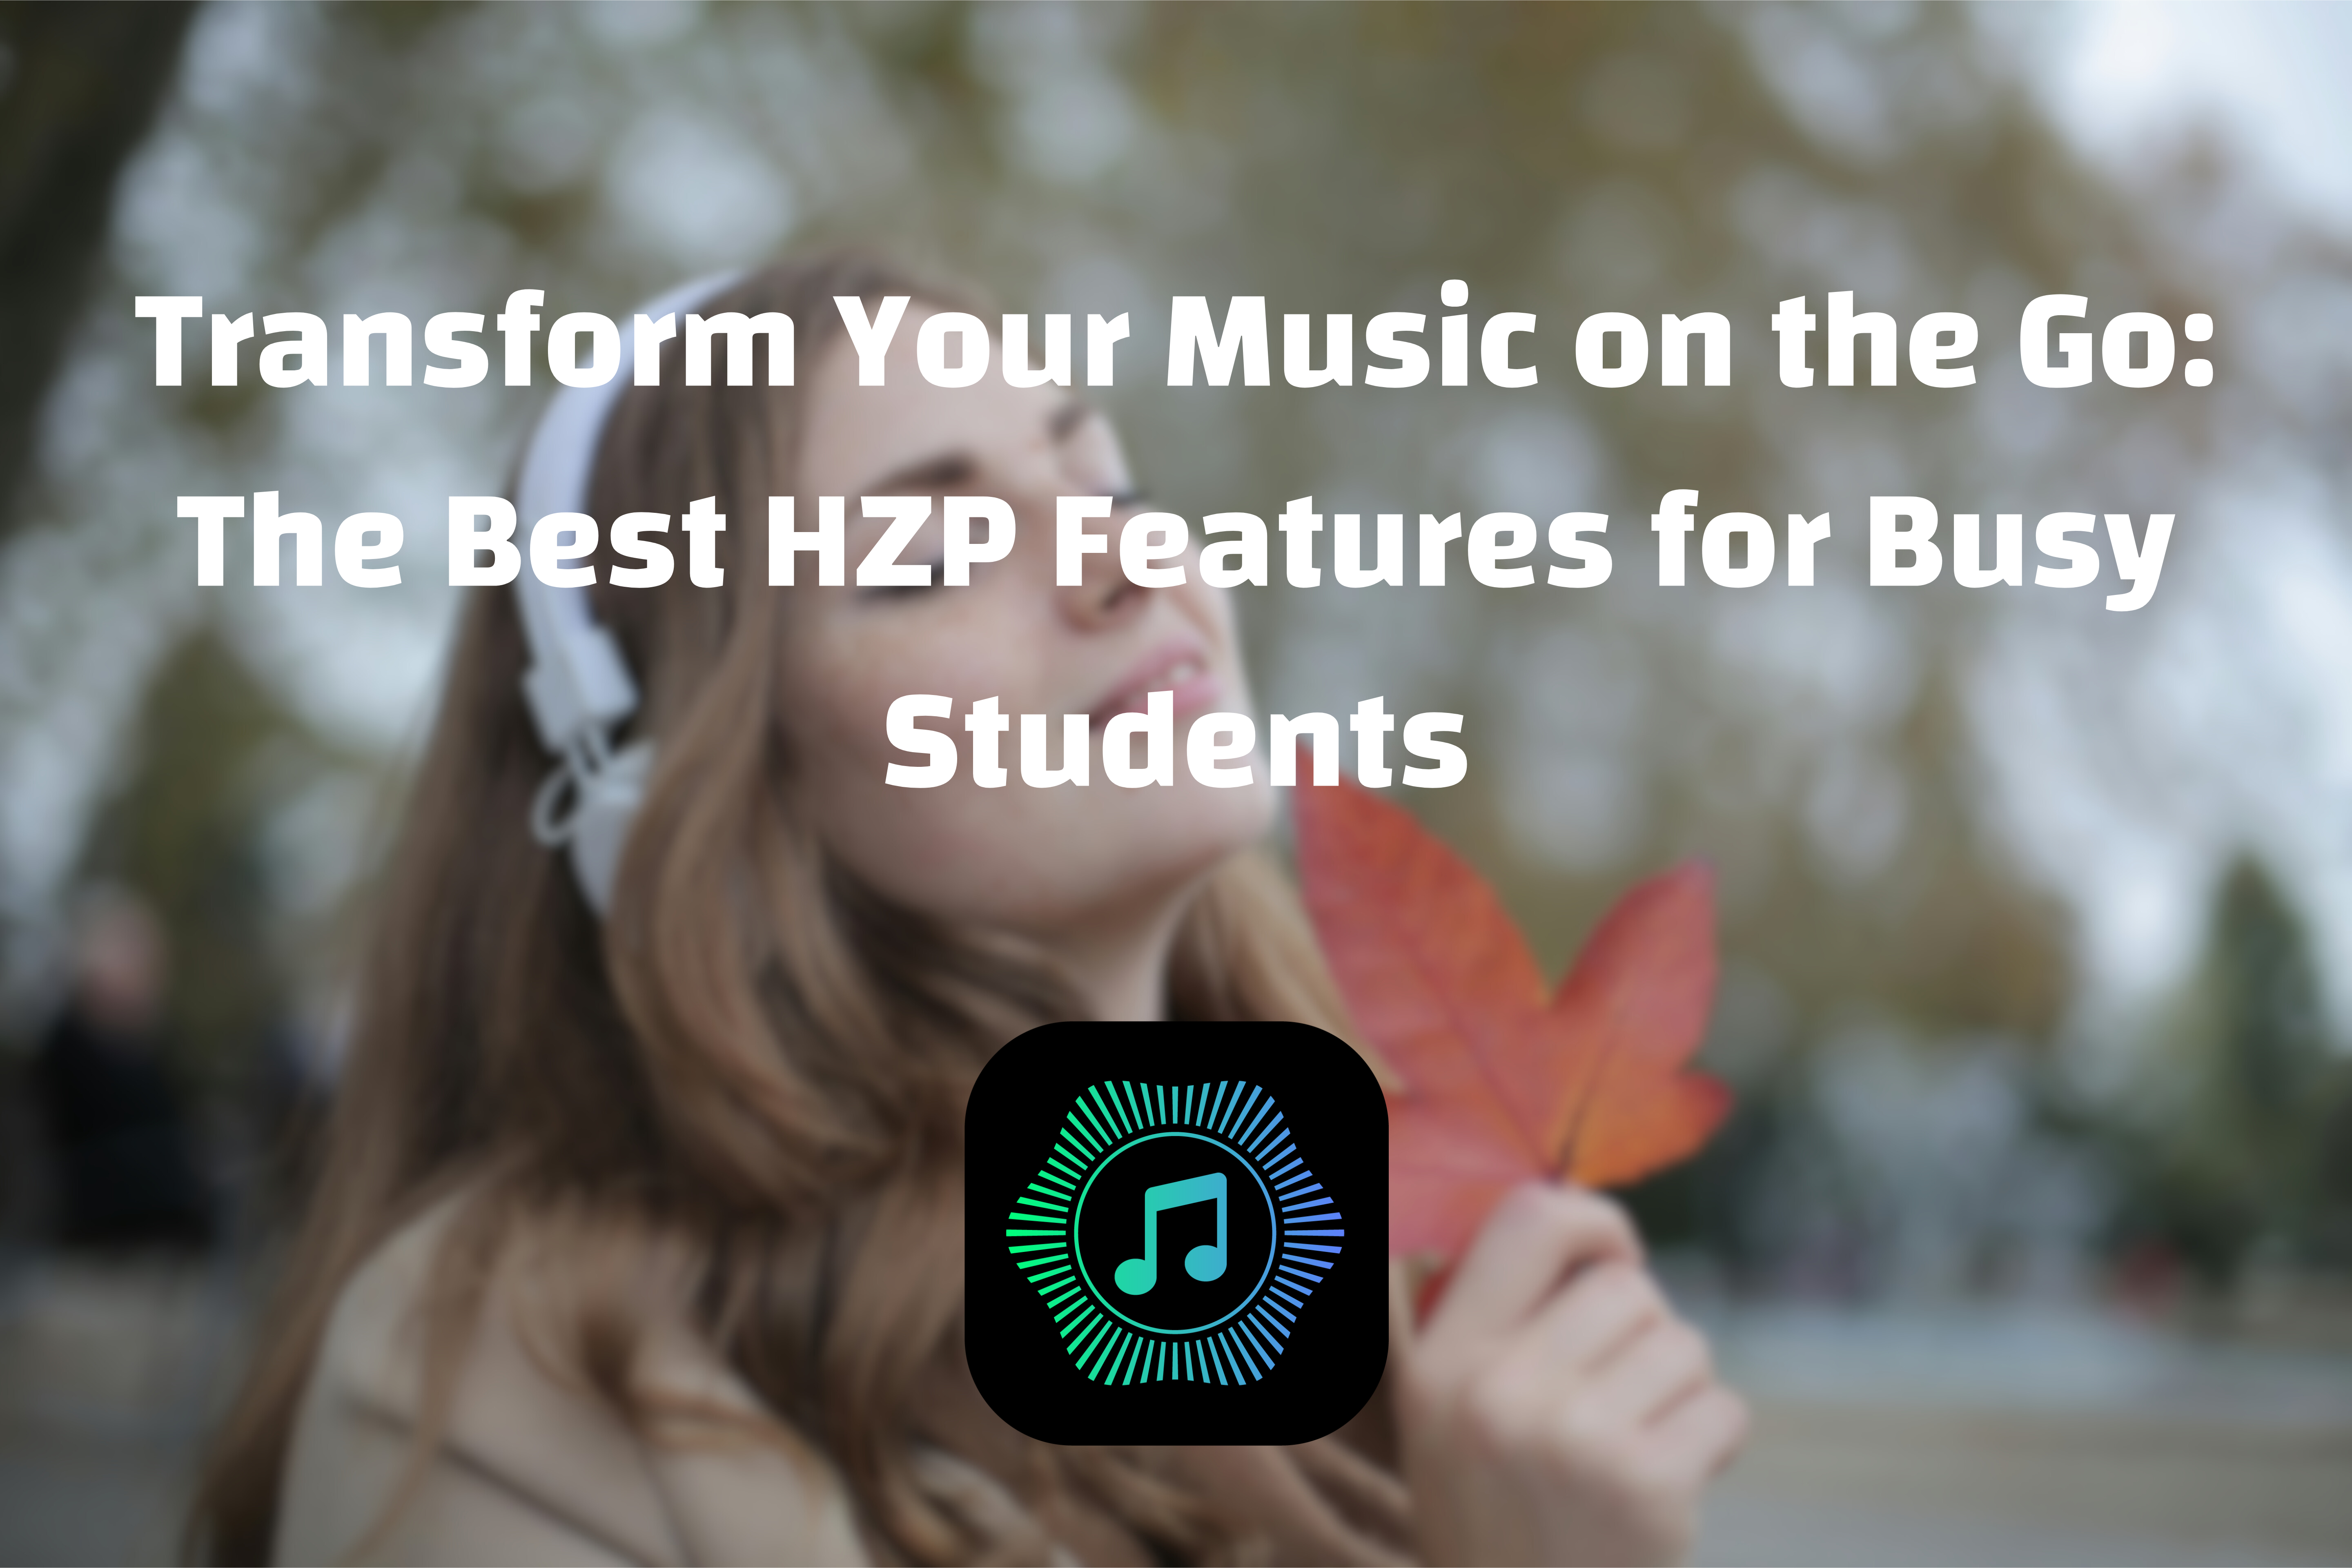 Transform Your Music on the Go: The Best HZP Features for Busy Students